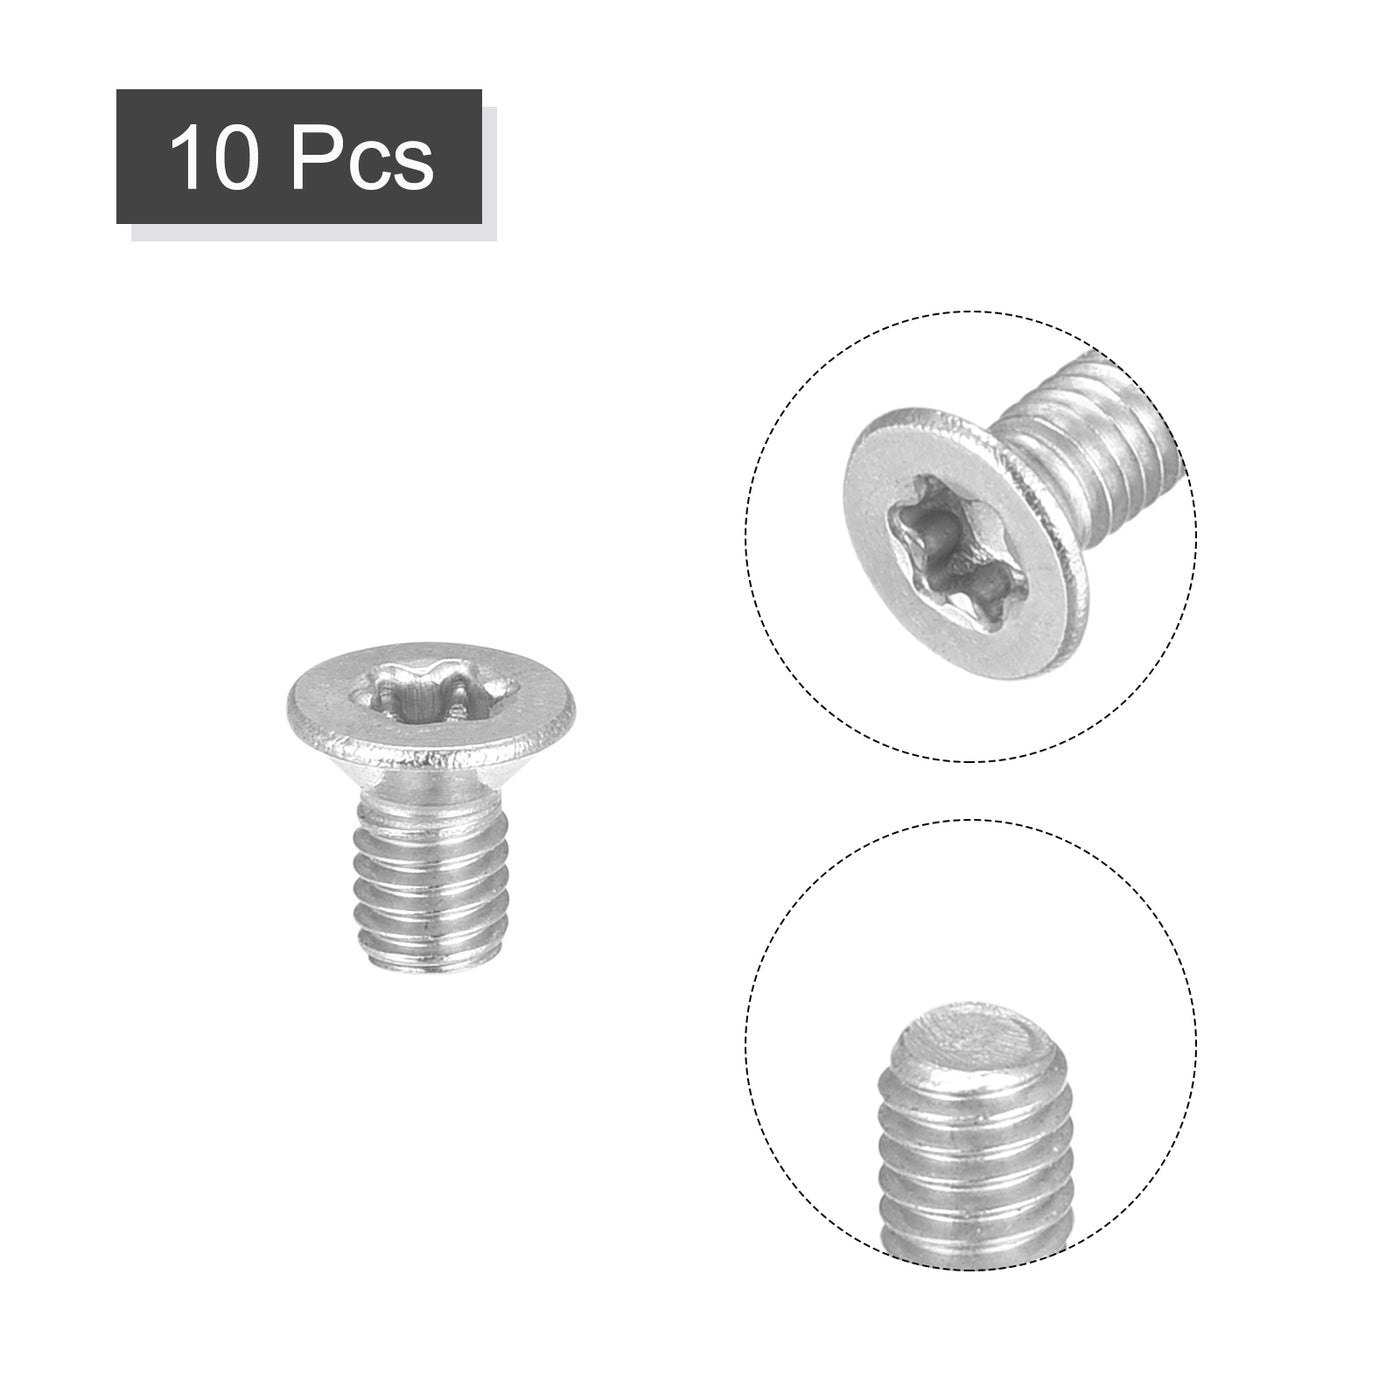 uxcell Uxcell M3x5mm Torx Security Screws, 10pcs 316 Stainless Steel Countersunk Head Screw